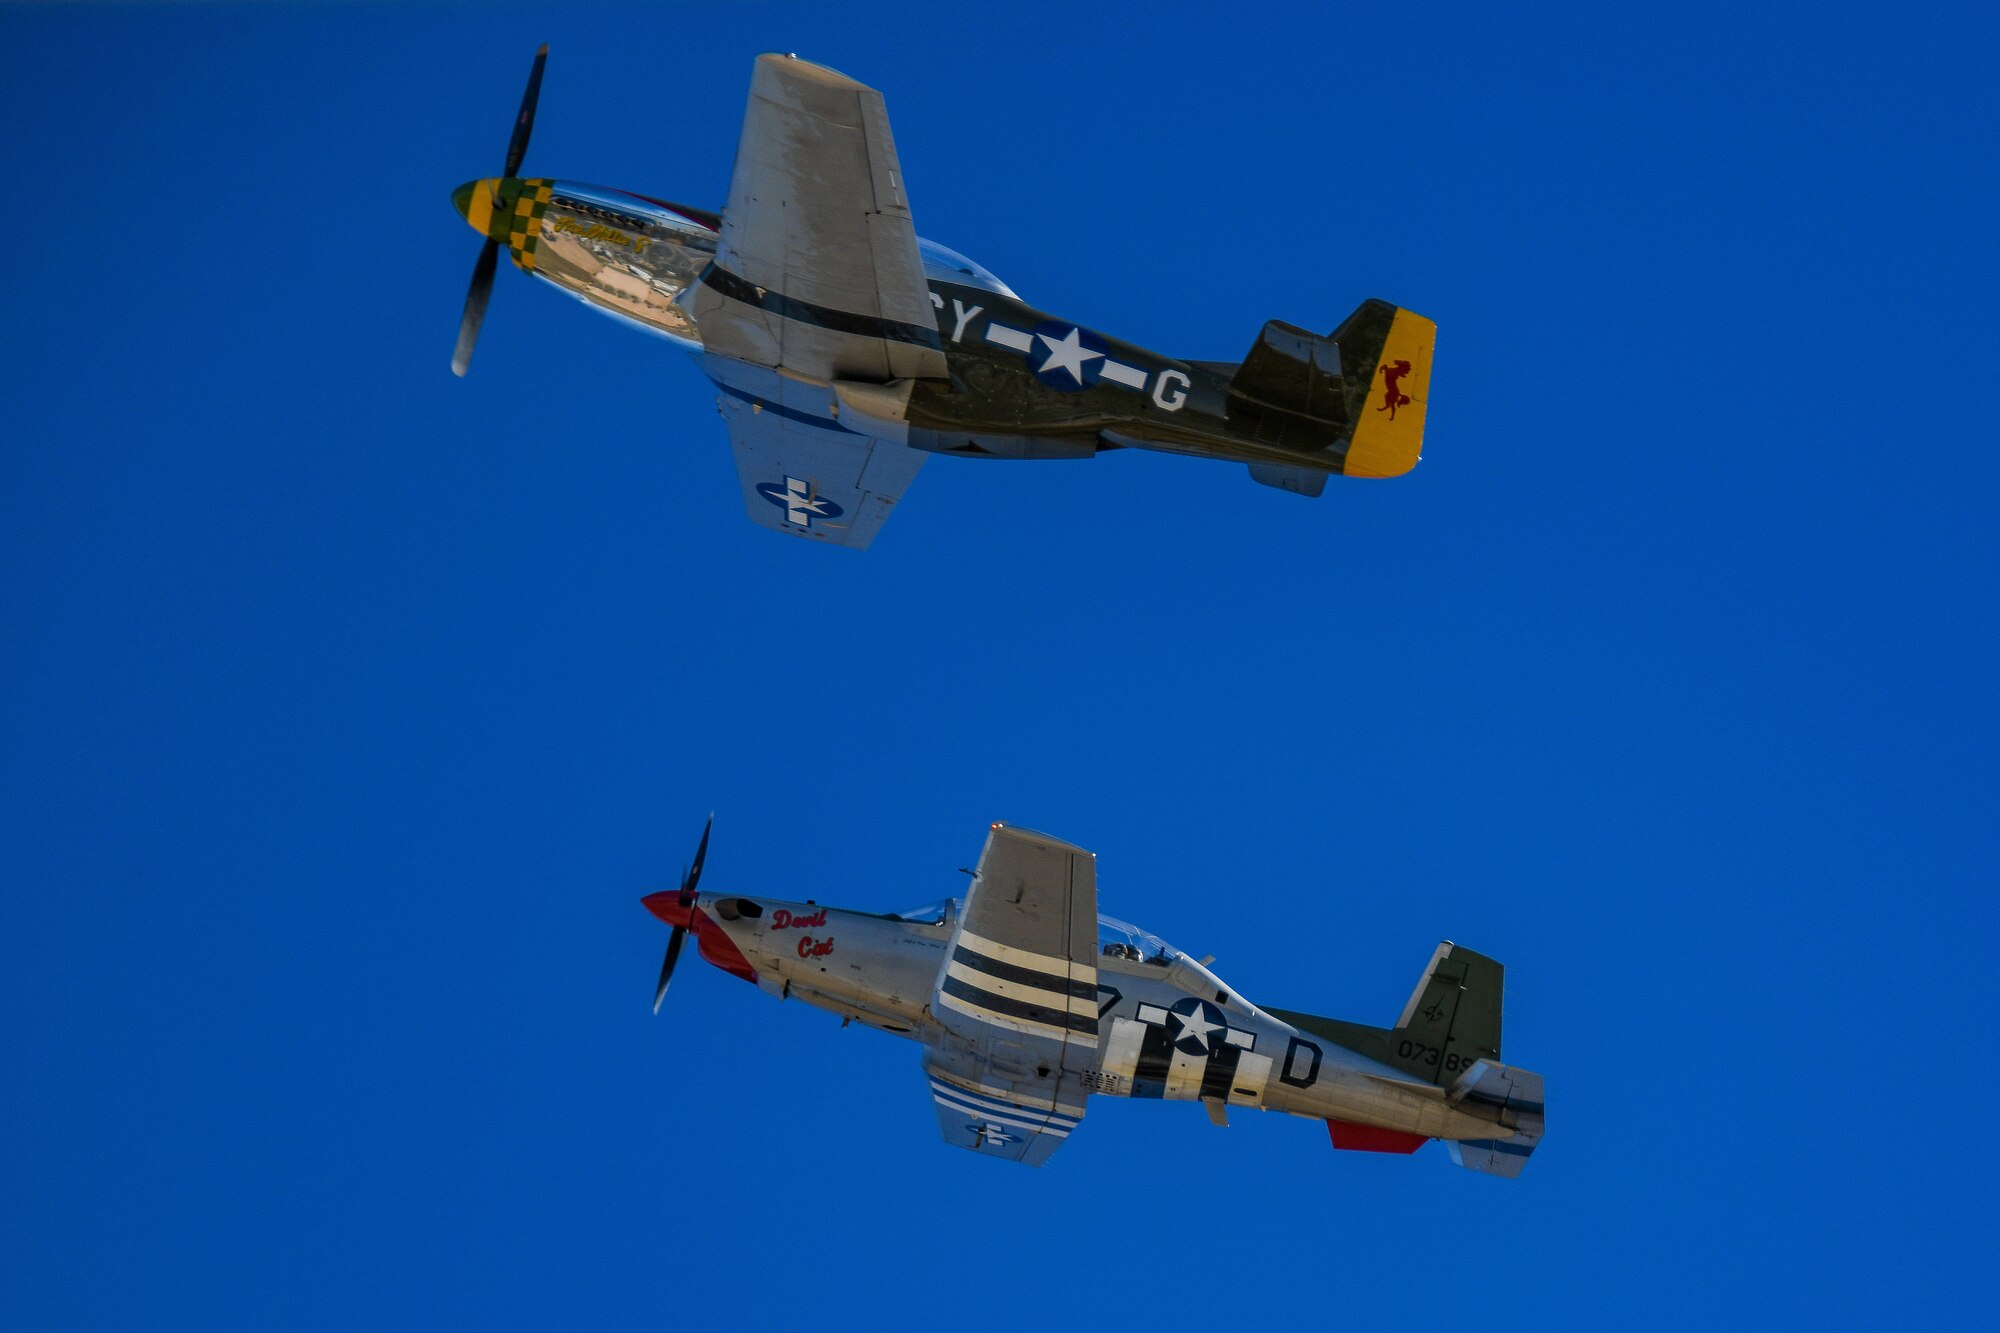 A P-51 Mustang and T-6 Texan II fly together in celebration of the 97th Flying Training Squadron's 25th anniversary on October 18, 2023.